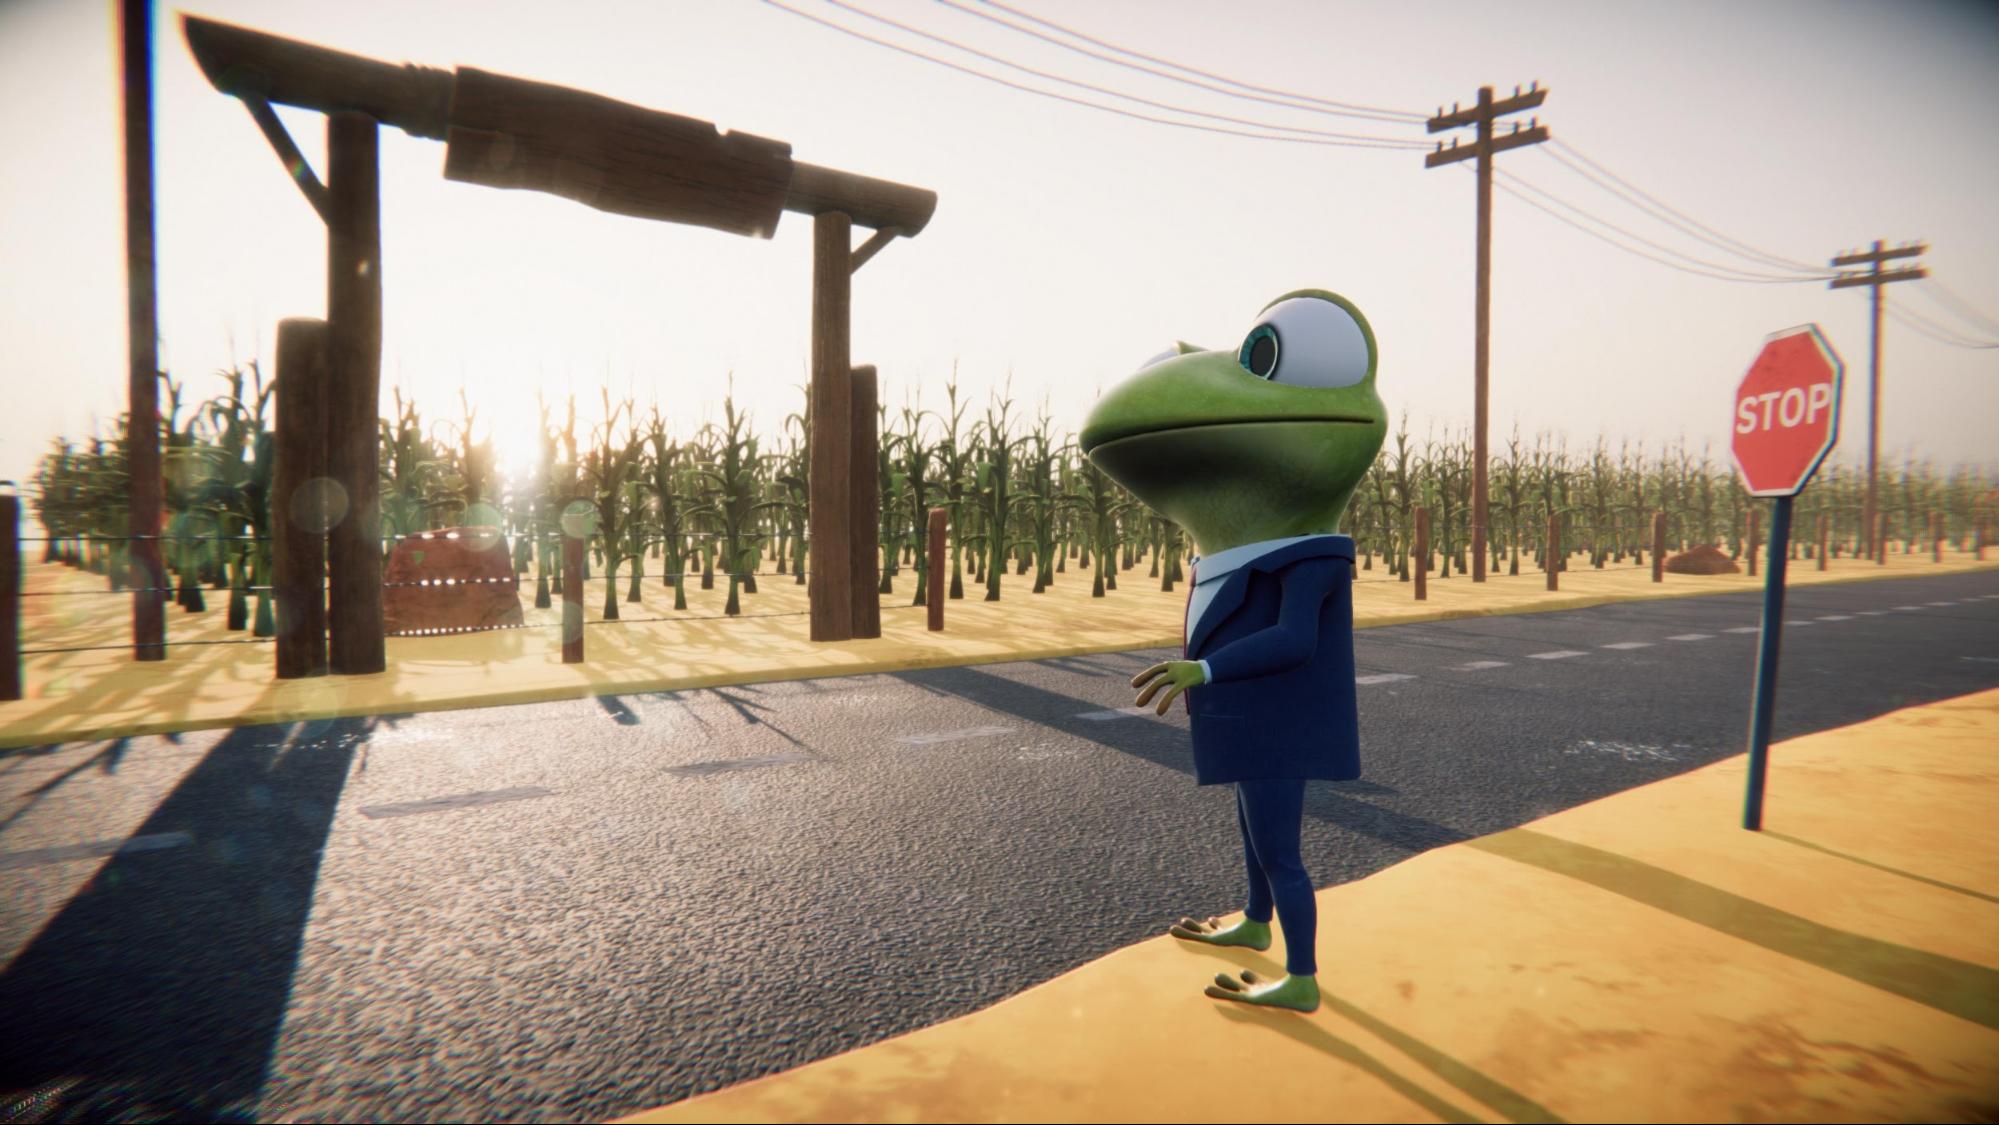 Shanks the frog is facing away from you/the camera, in a desert type in environment. There is a road in front of in then fields. He is standing next to a stop sign.